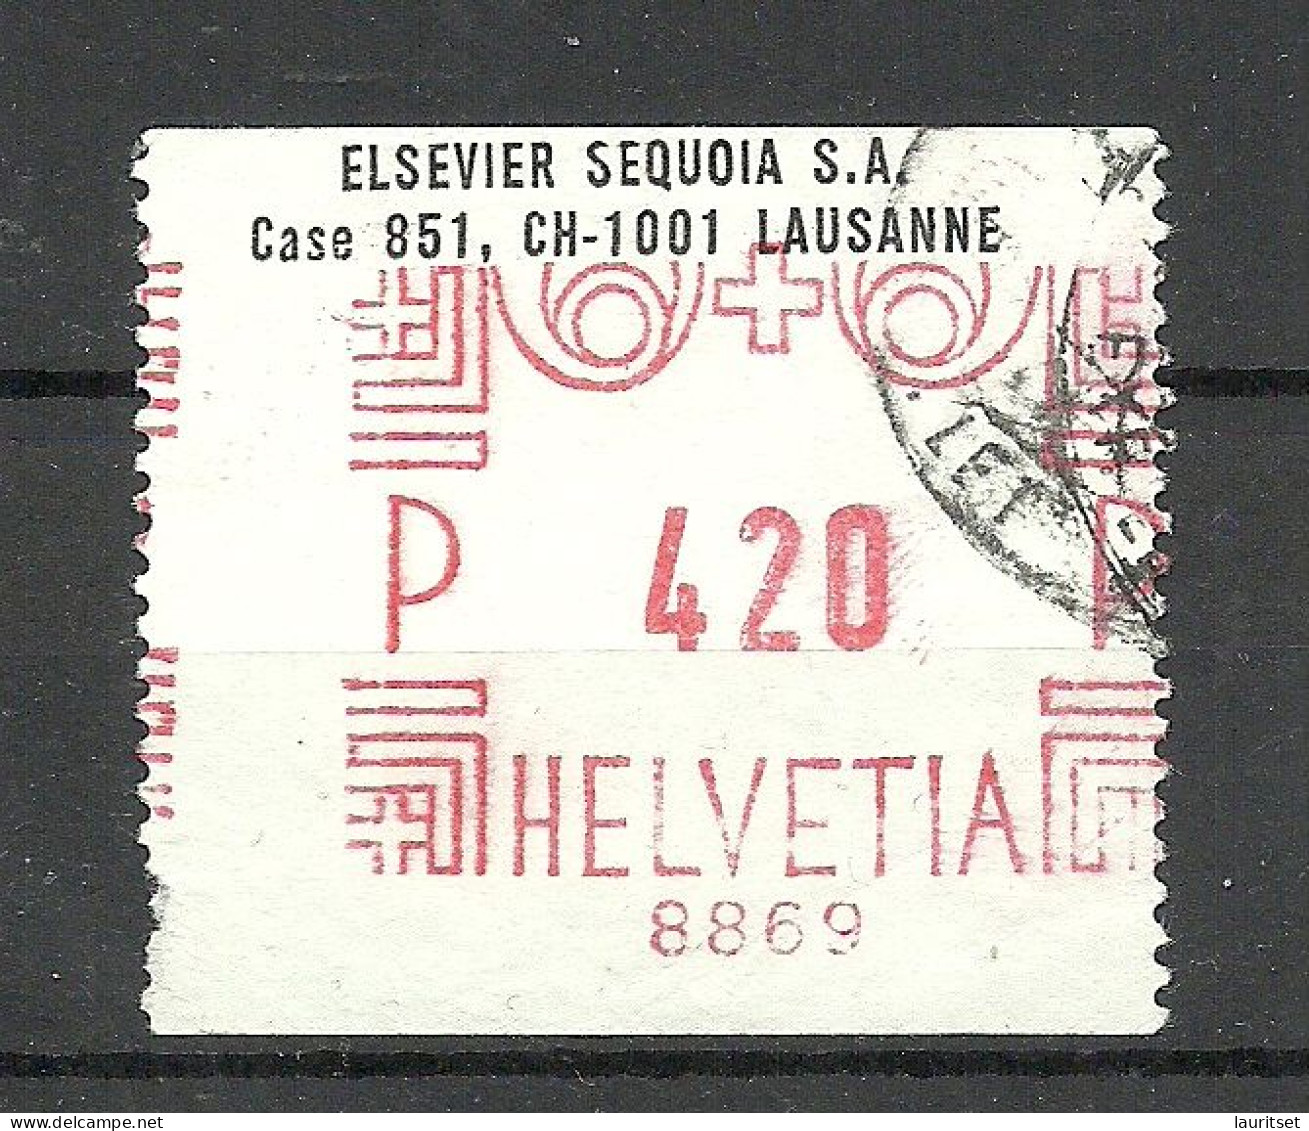 SCHWEIZ Switzerland - Automatenmarke O 1975 LAUSANNE Elsevier Sequoia S.A. - Timbres D'automates